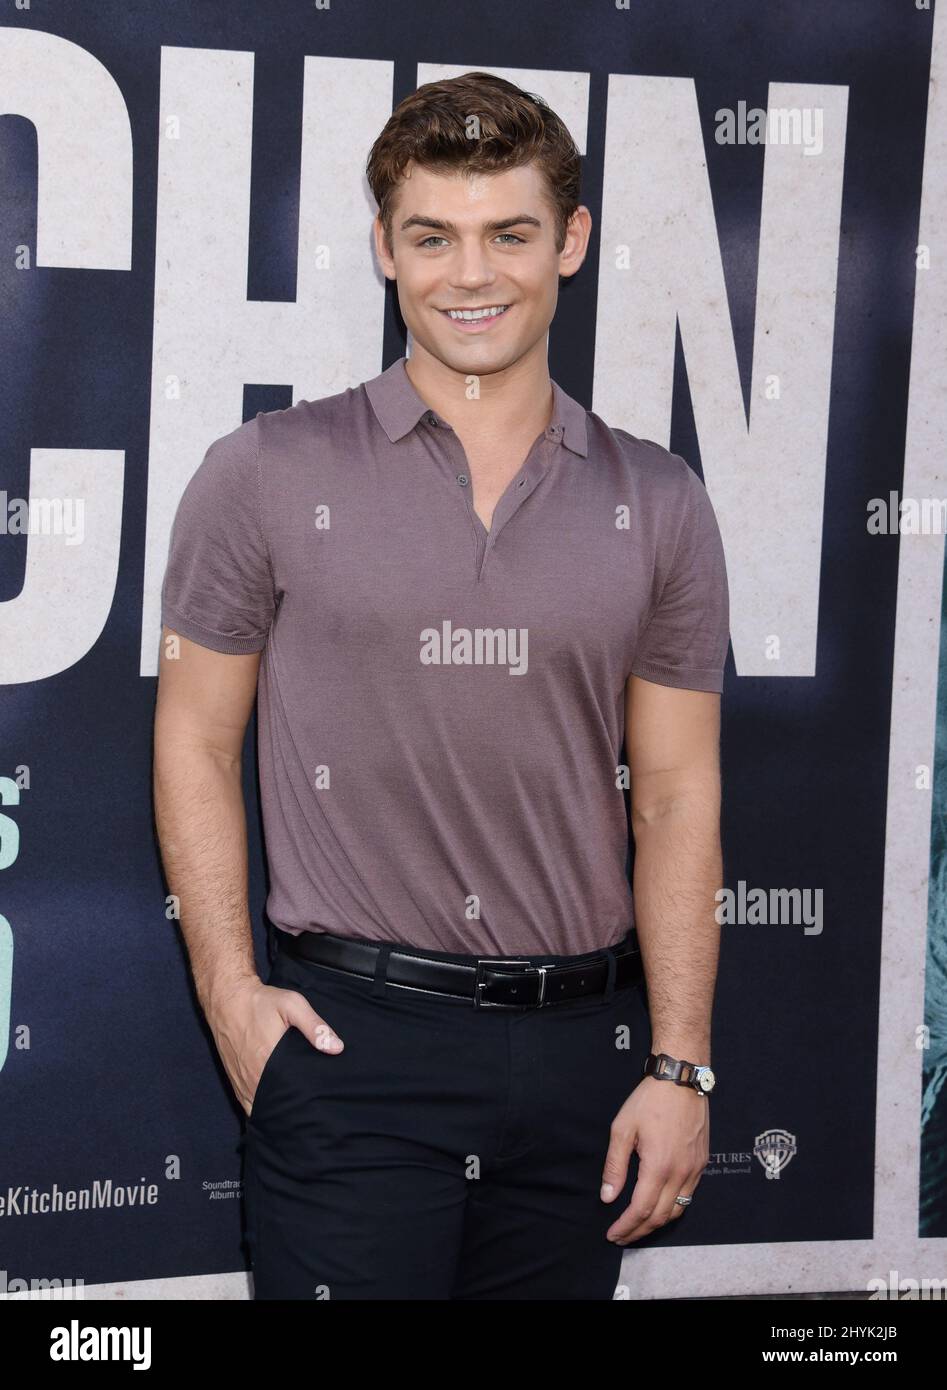 Garrett Clayton at 'The Kitchen' world premiere held at the TCL Chinese Theatre on August 5, 2019 in Hollywood, Los Angeles. Stock Photo